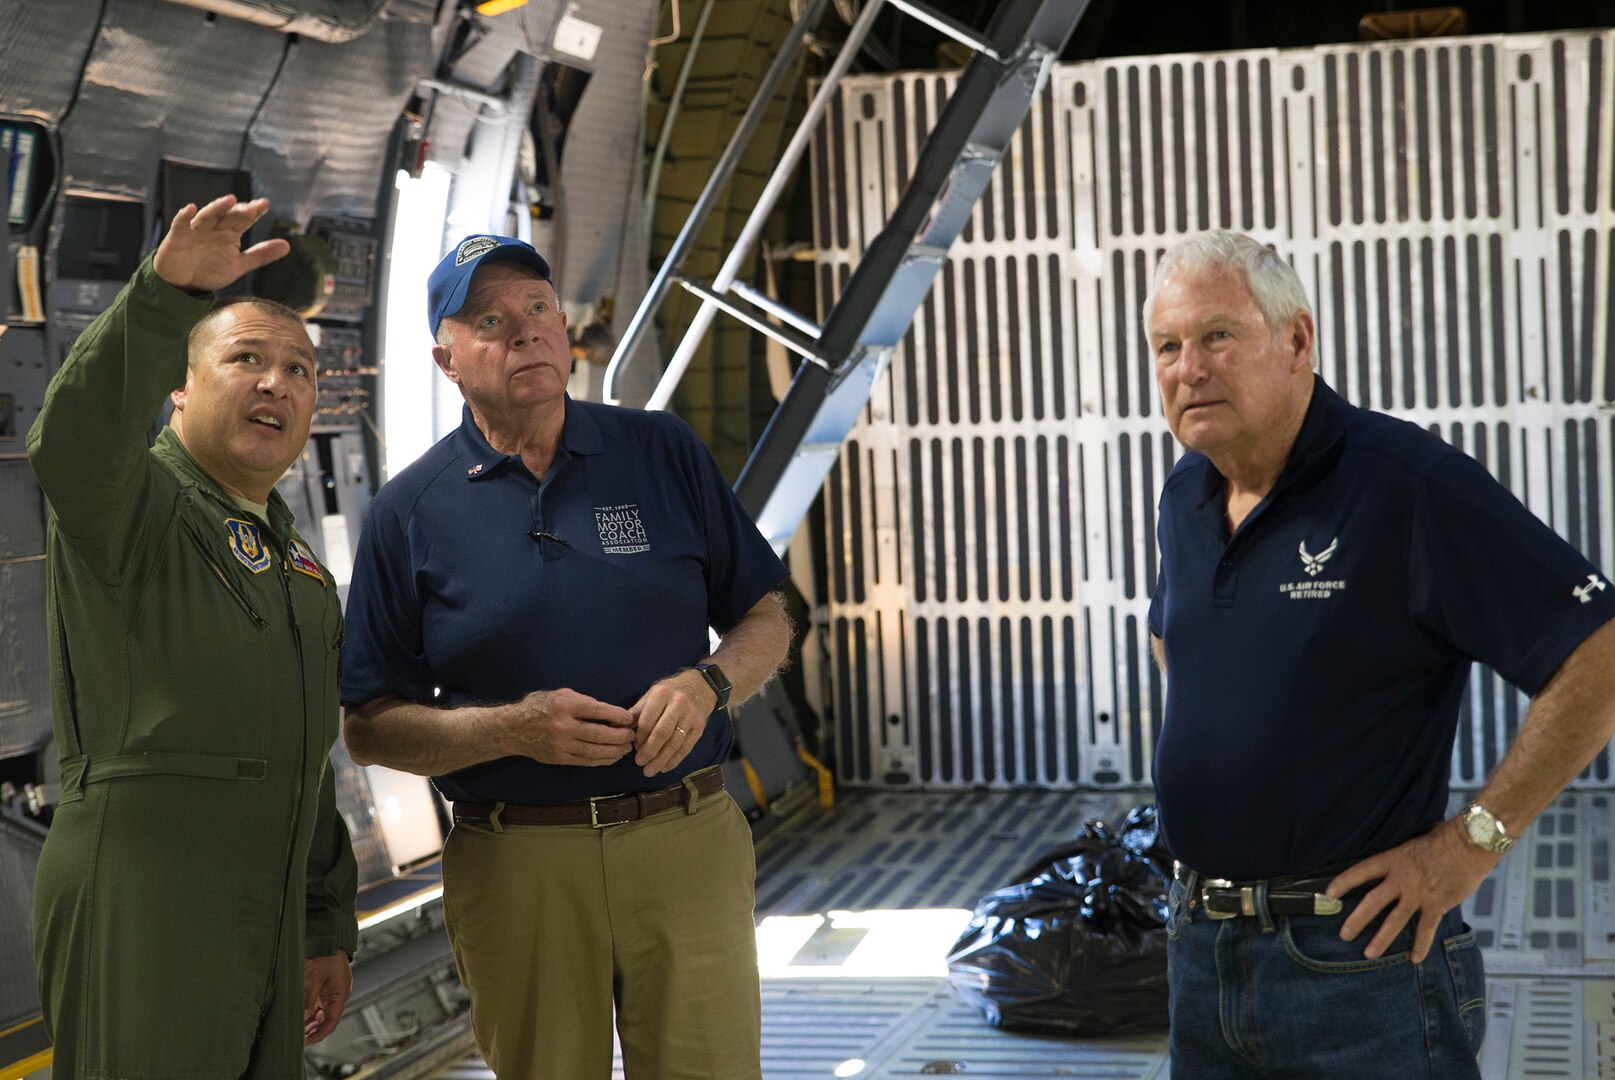 Master Sgt. Dave Delgado, a 356th Airlift Squadron load master, explains the different load configurations of a C-5M Super Galaxy aircraft to Jon Walker (left), Family Motor Coach Association  senior vice president, and Charlie Adcock FMCA president, Feb. 21, 2017 at Joint Base San Antonio-Lackland, Texas. Adock, a retired Air Force load master, stopped by the 433rd Airlift Wing to view the unit's new C-5M Super Galaxy which arrived in June 2016.  (U.S.  Air Force photo by Benjamin Faske)